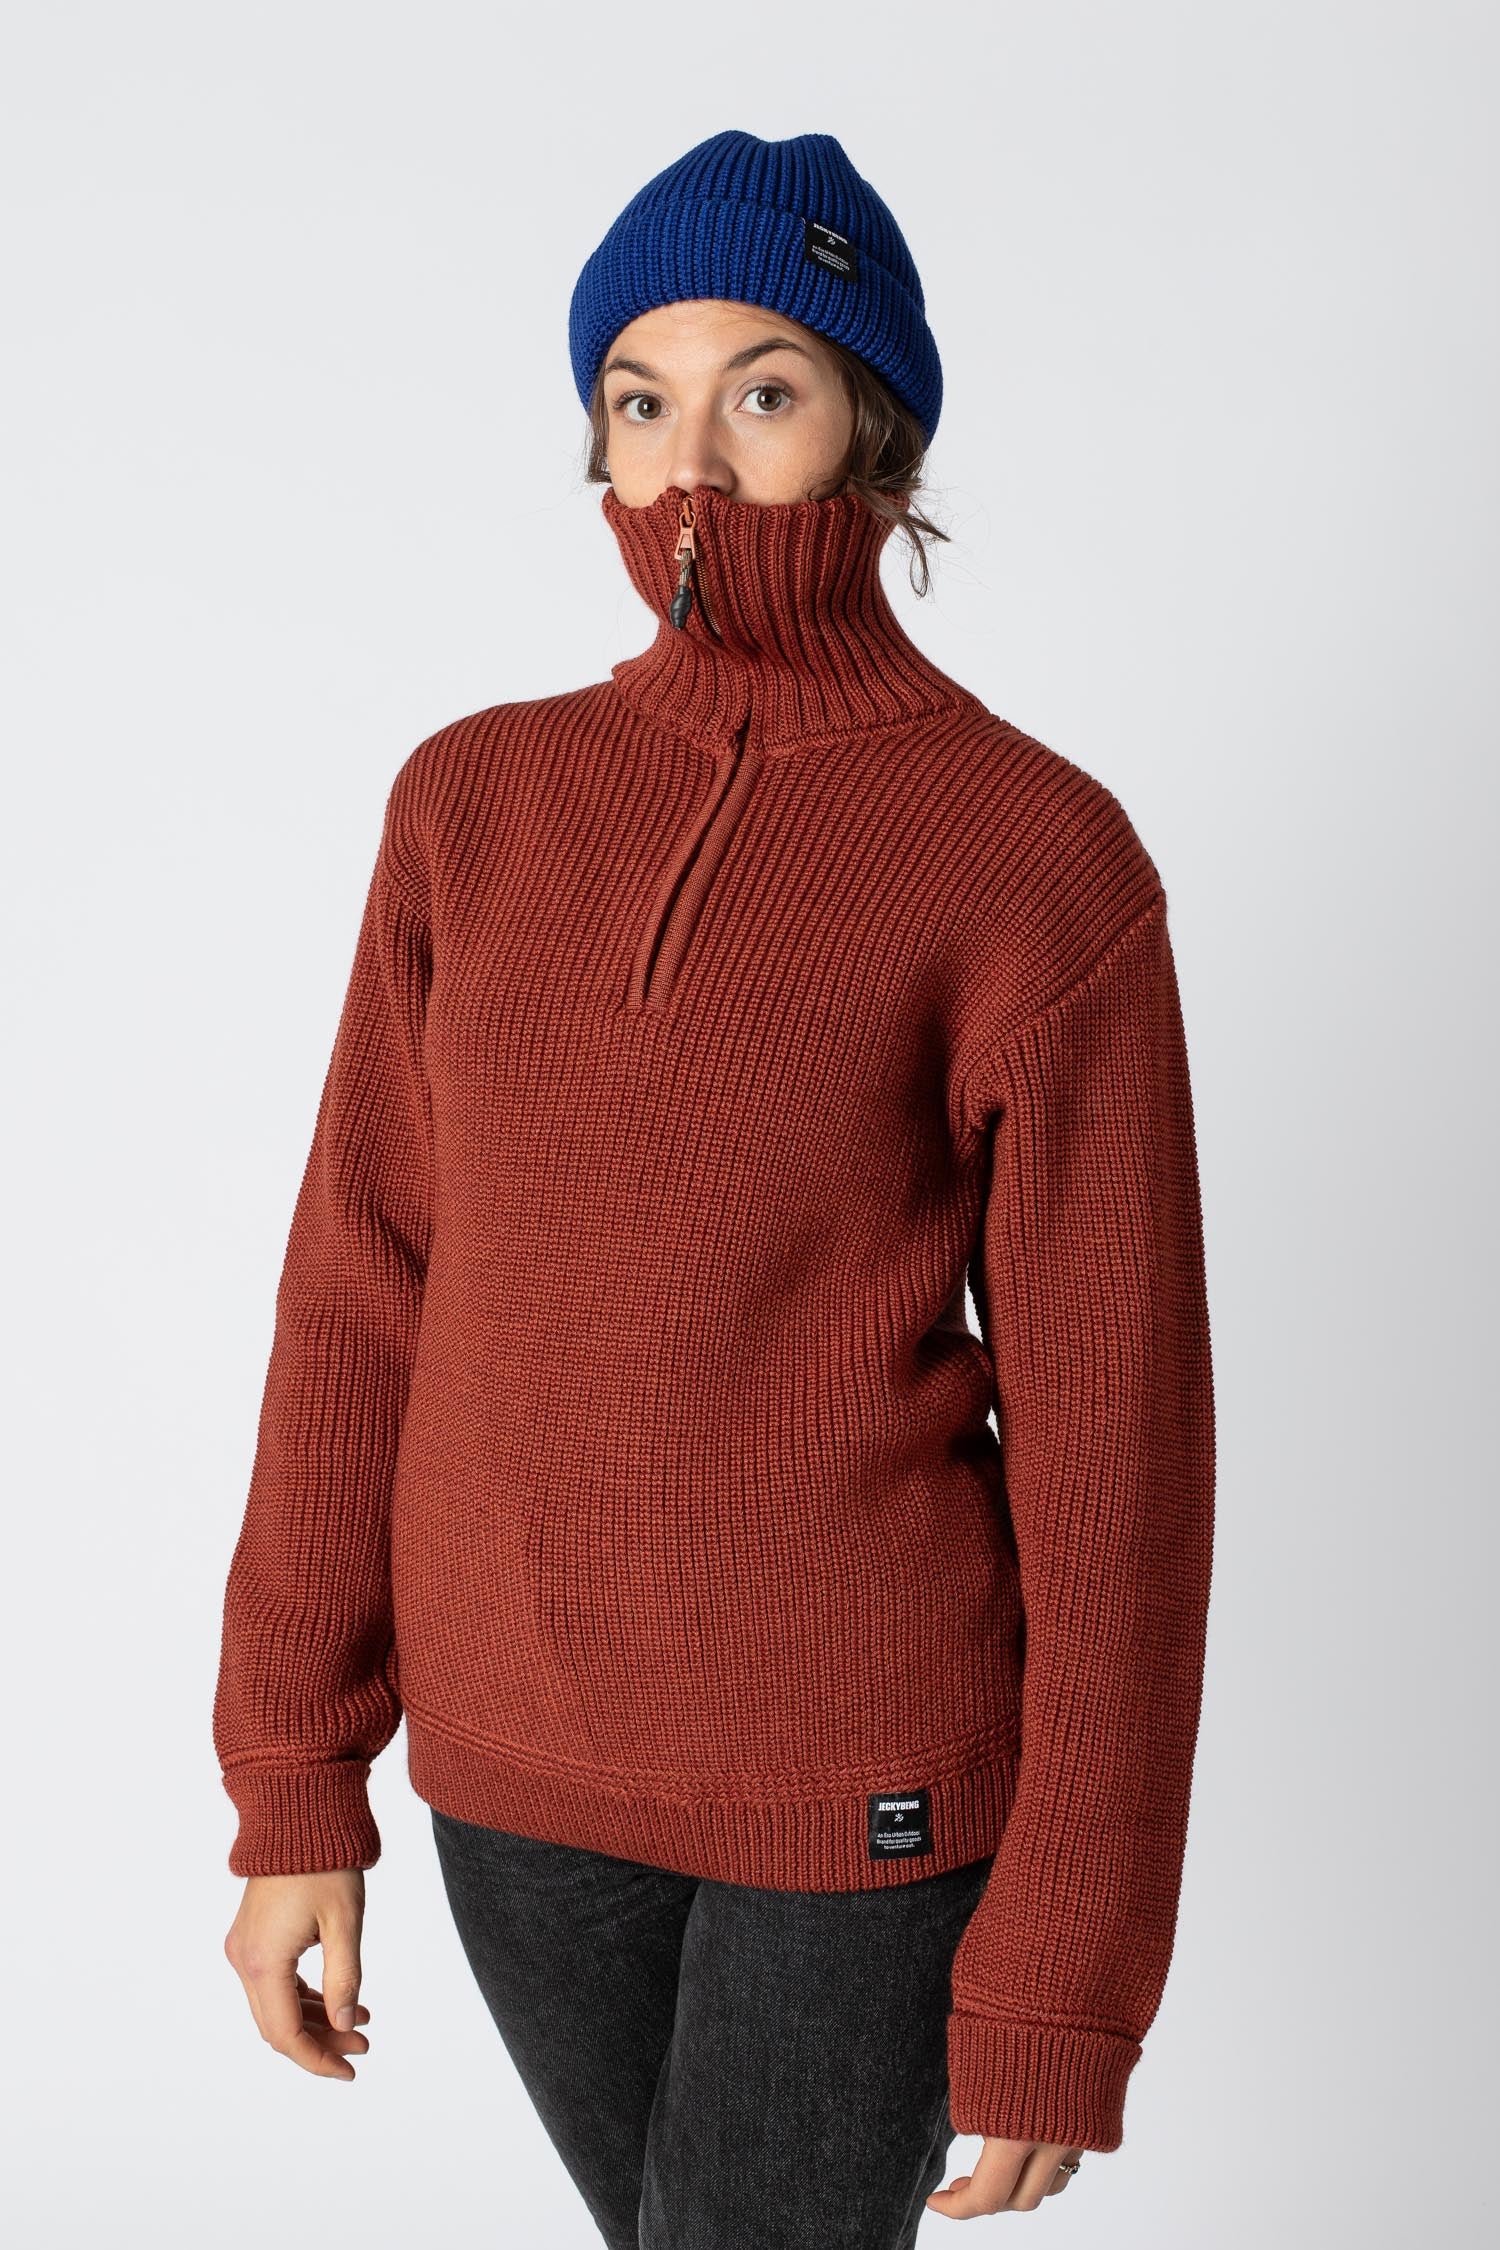 JECKYBENG-The-MERINO-TROYER-03 copper